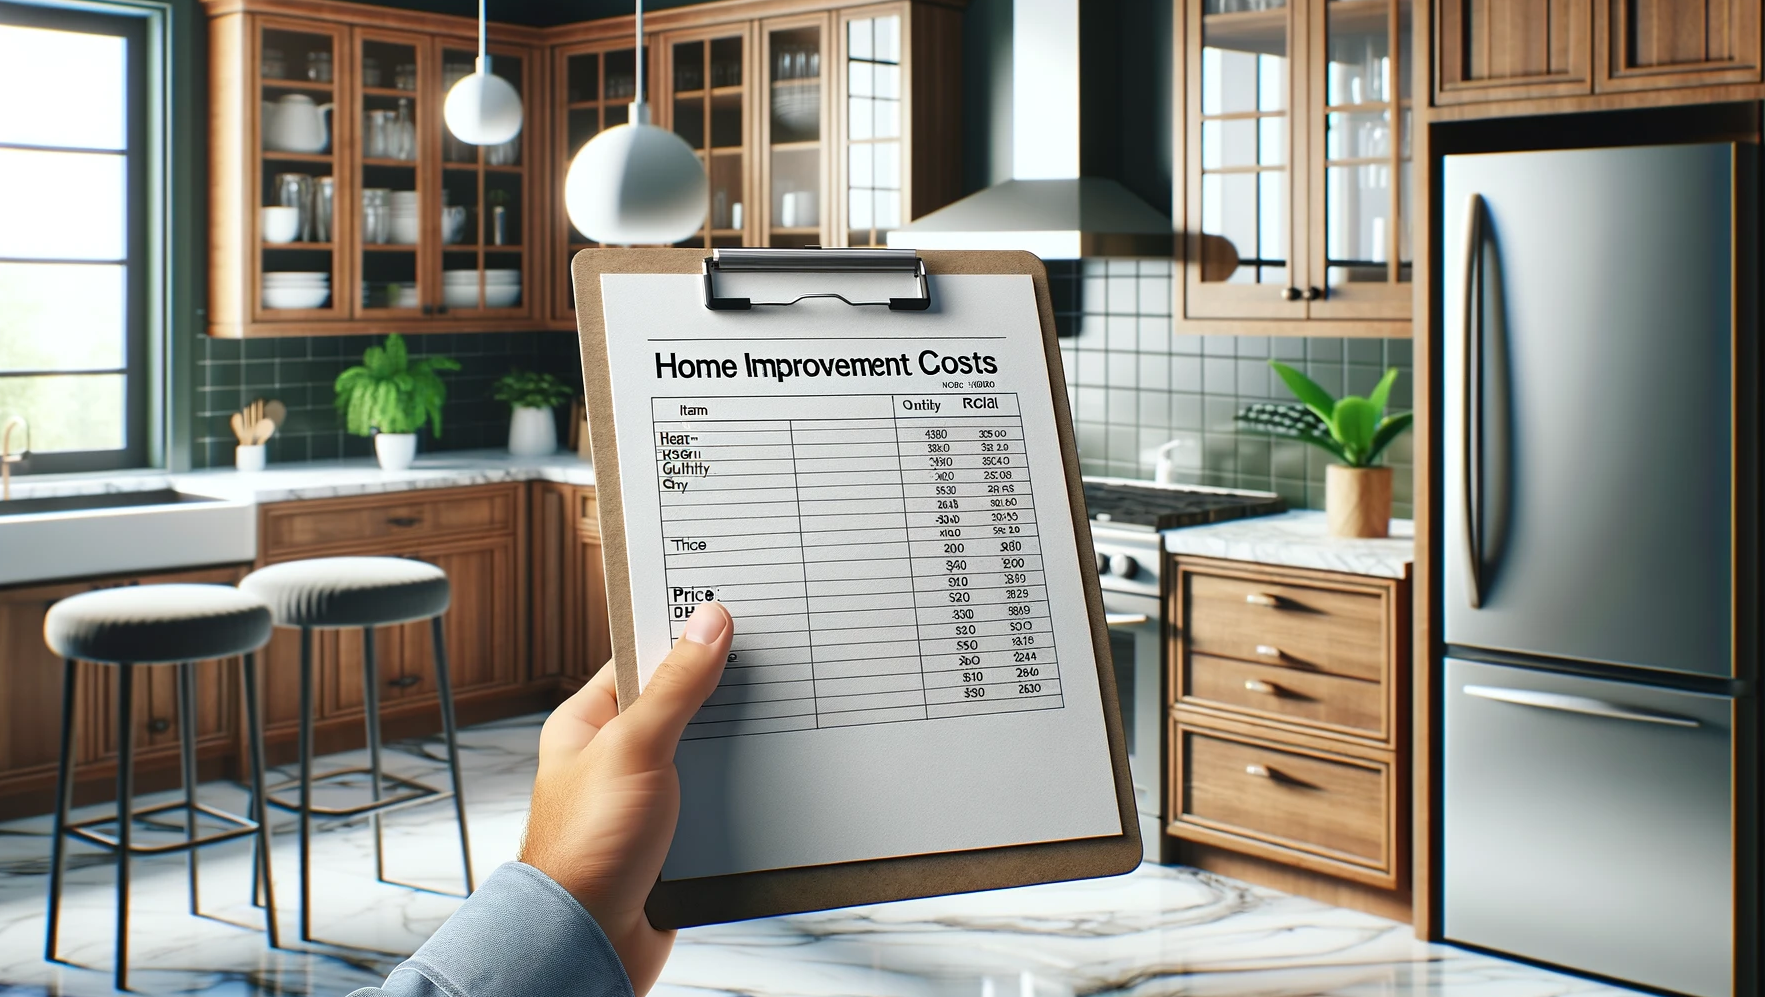 Average cost of home improvements like kitchen remodels, a new garage door, vinyl siding and more